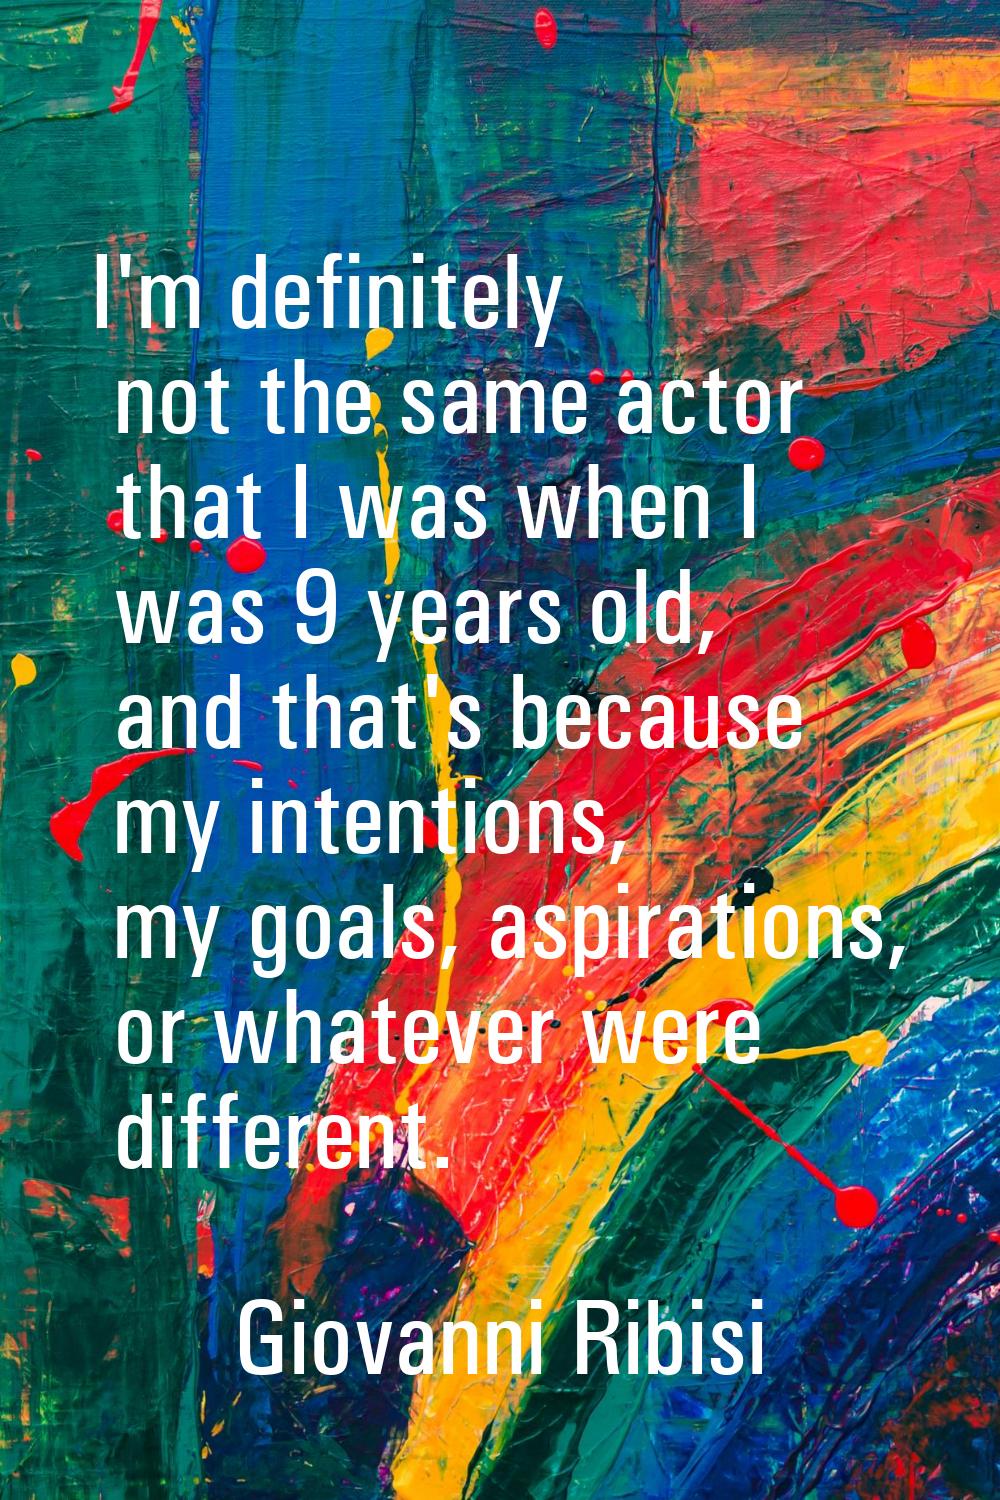 I'm definitely not the same actor that I was when I was 9 years old, and that's because my intentio